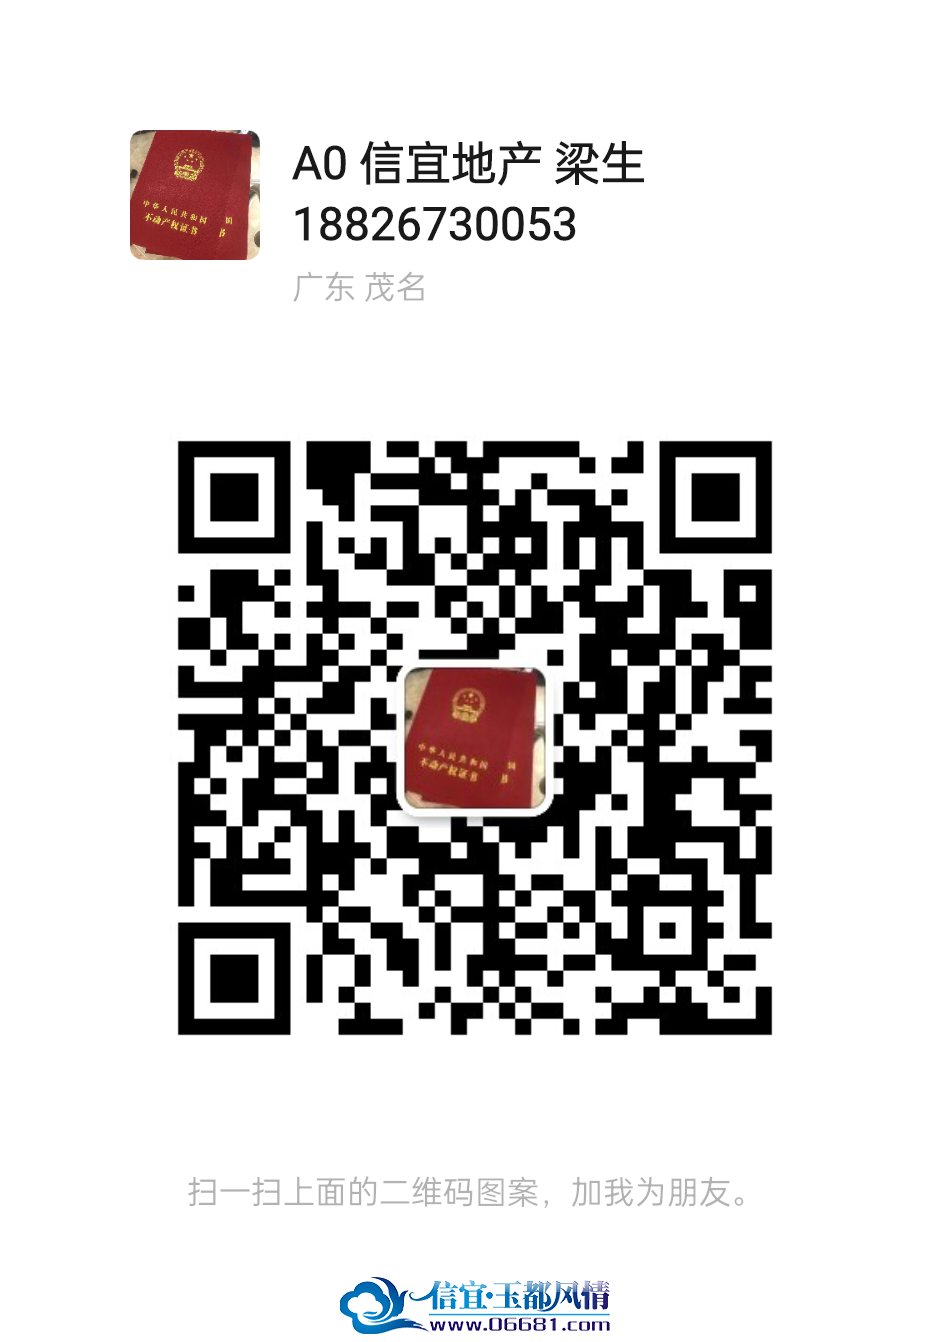 mmqrcode1704521315774.png